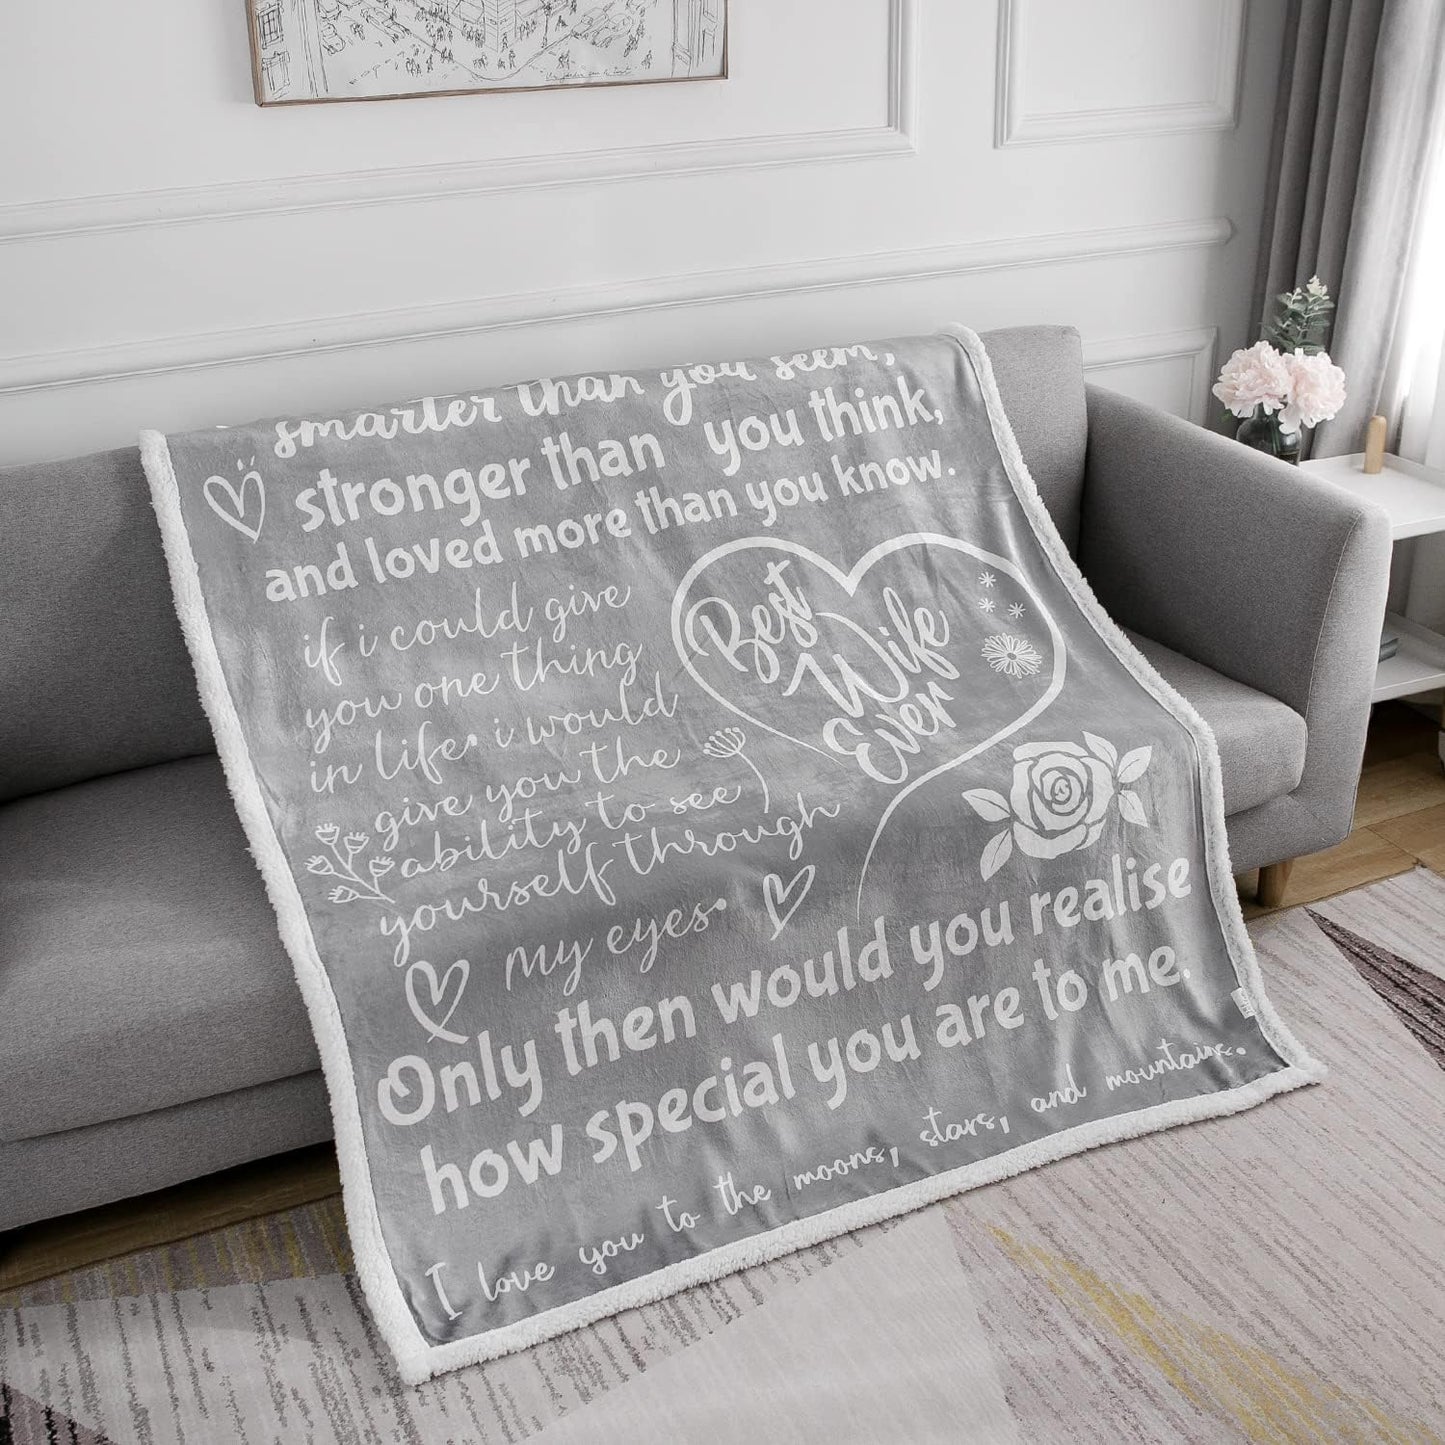 Wife Happy Anniversary Blanket with printed Loving Words